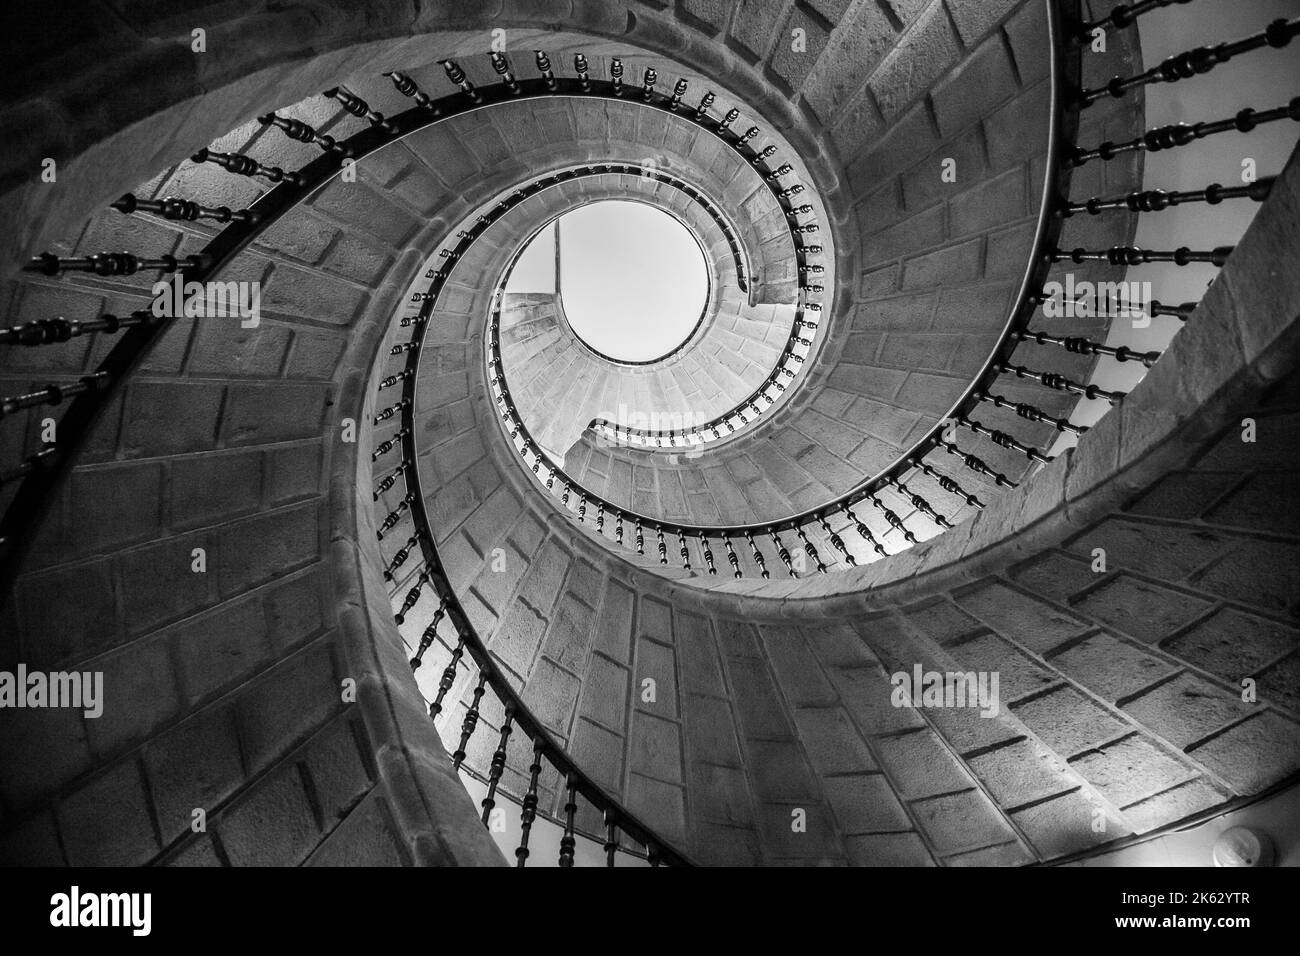 interior circular stone staircase, elaborate and decorative architectural details Stock Photo